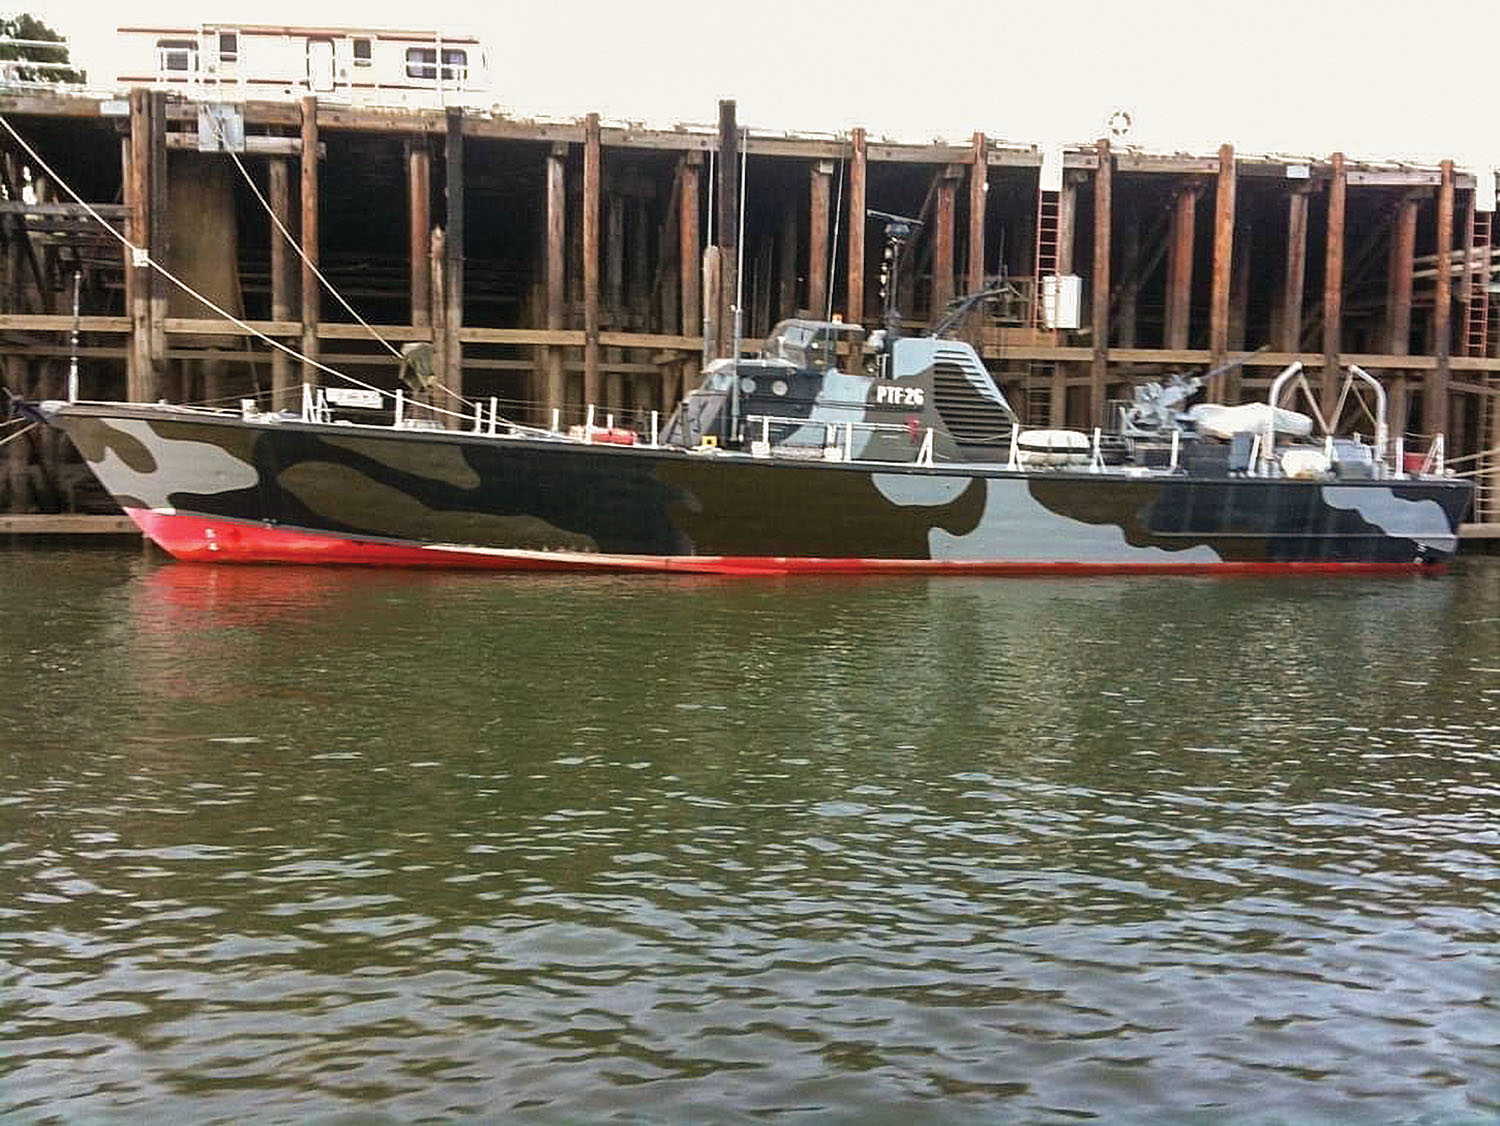 PTF-26 could leave California as soon as August for a trip first to Ensenada, Mexico, where it will be transported as deck cargo through the Panama Canal and on into the Gulf of Mexico. Known as the last American PT boat, it could arrive on the Ohio River by mid-September. (Photo courtesy of Maritime Pastoral Training Foundation Ltd.)